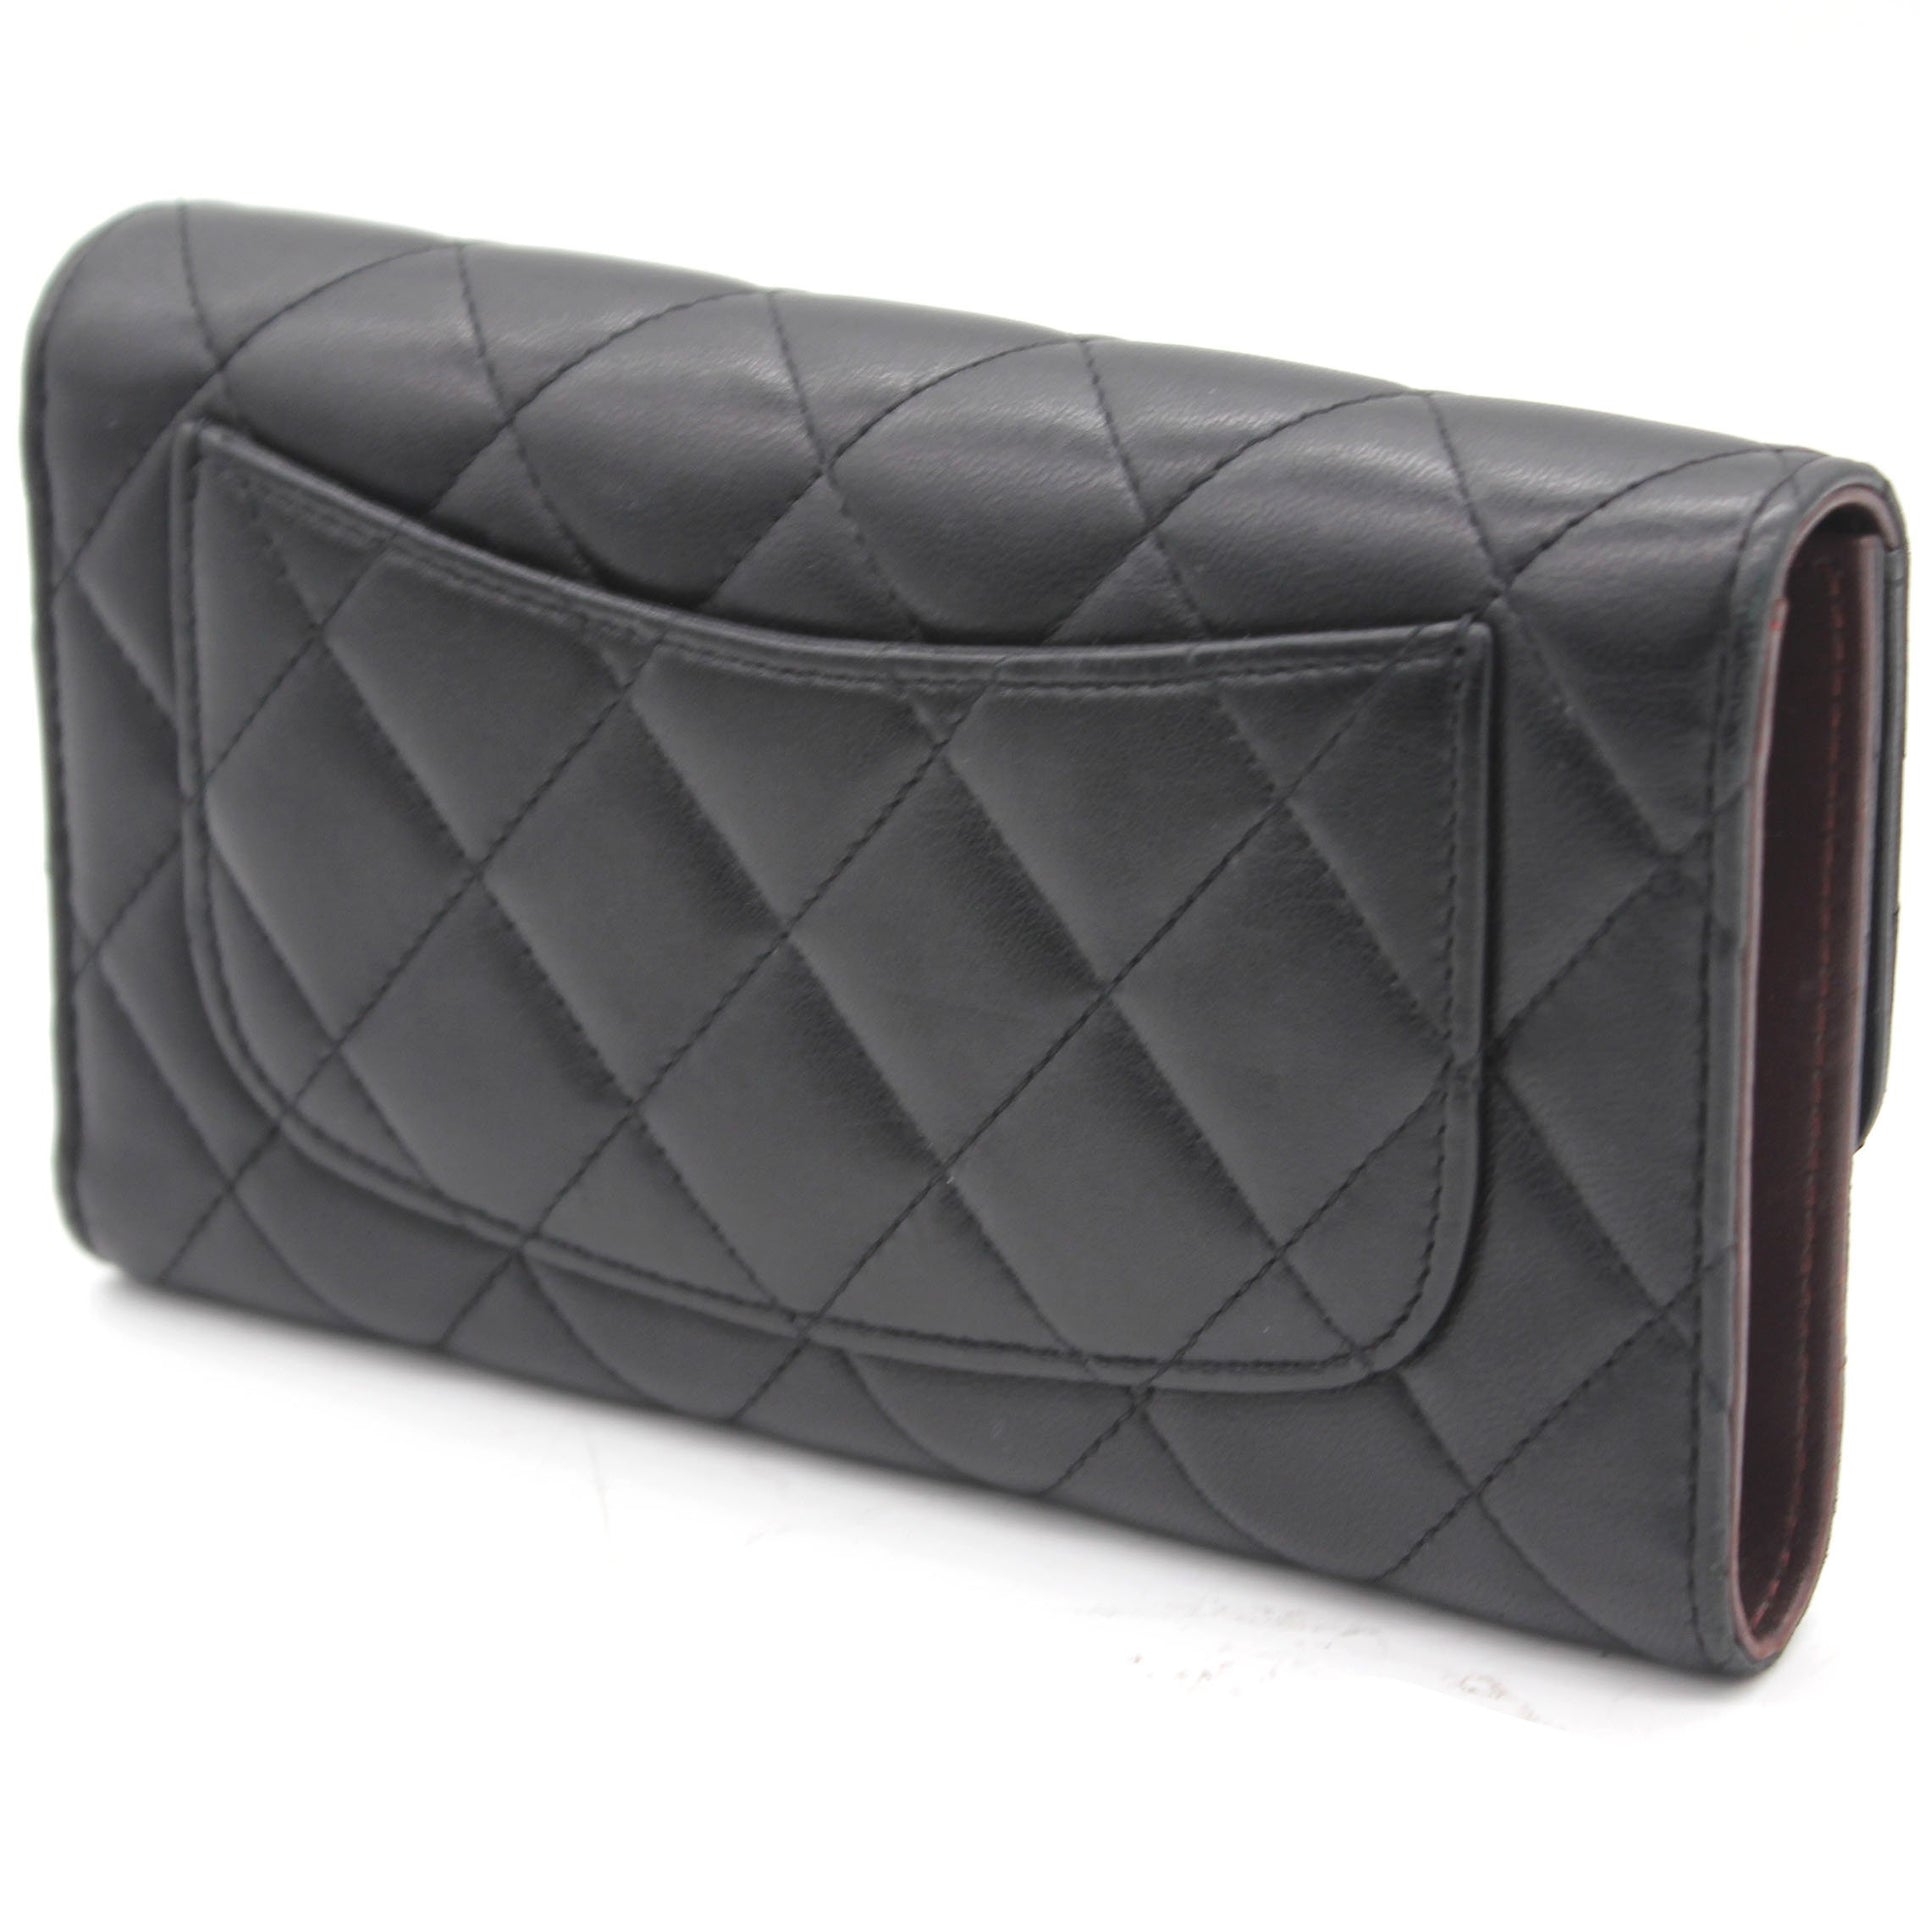 Chanel Black Quilted Caviar Leather Classic Flap Wallet Chanel